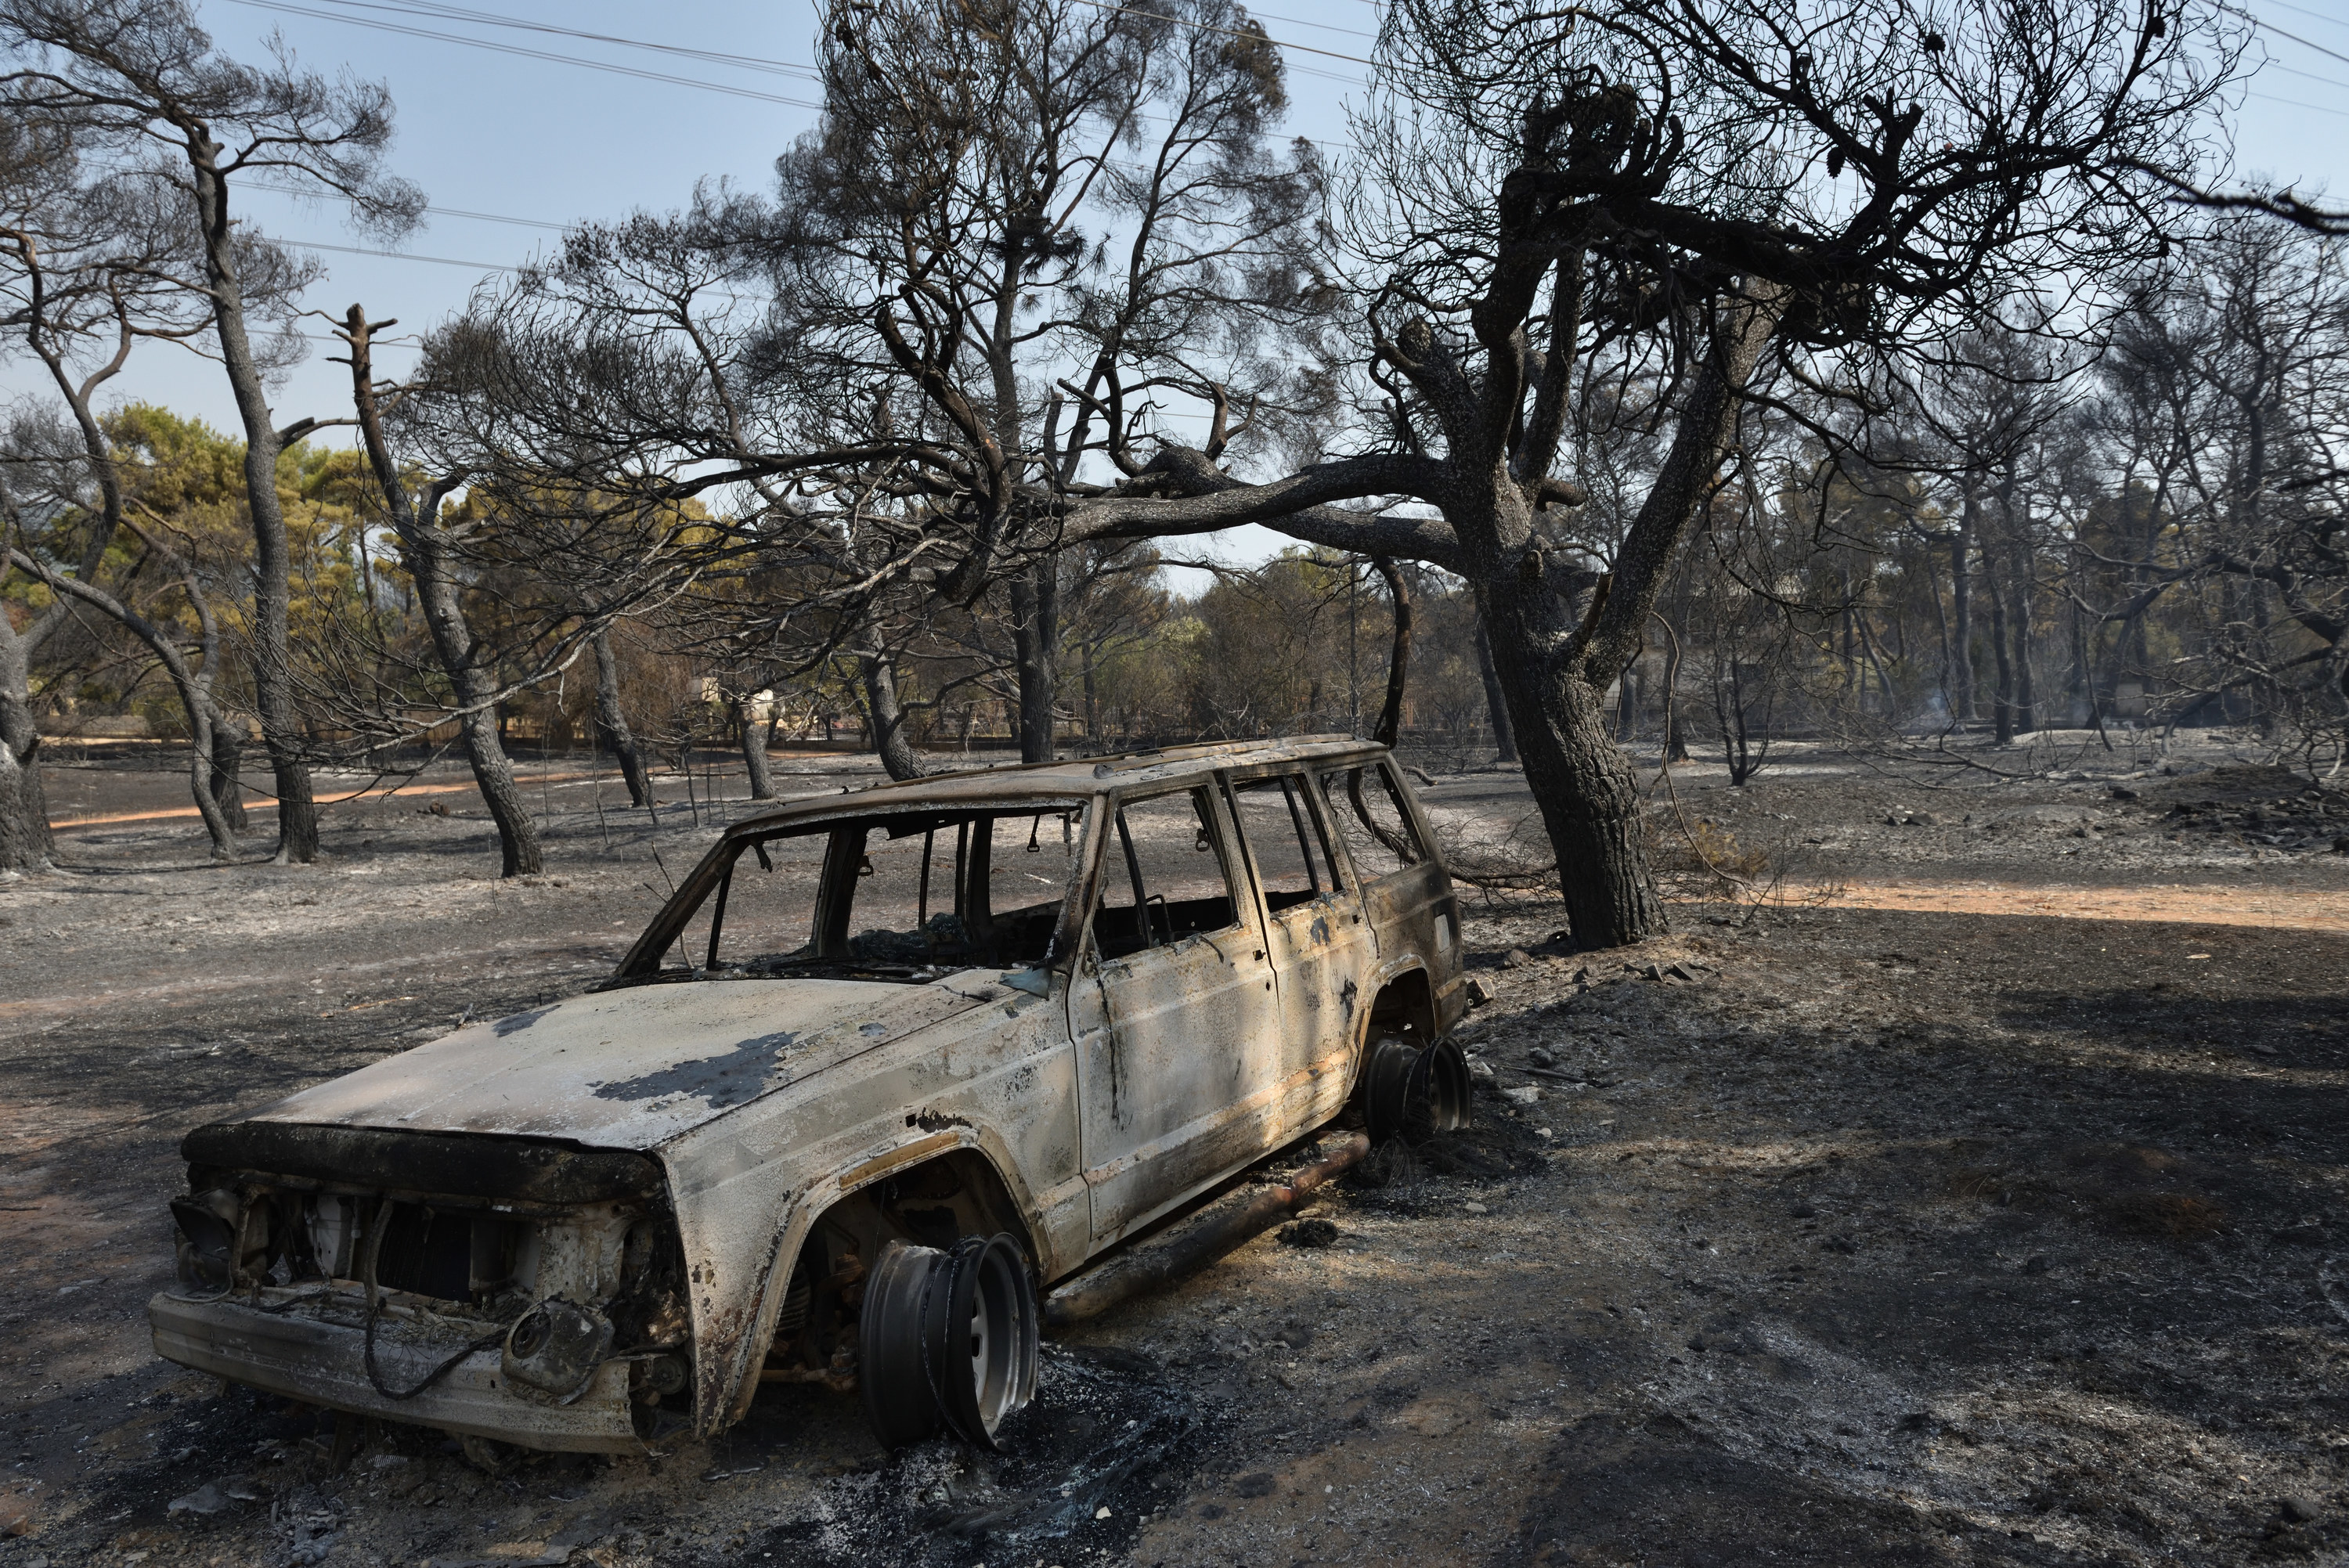 A burned out car in the middle of a wooded area